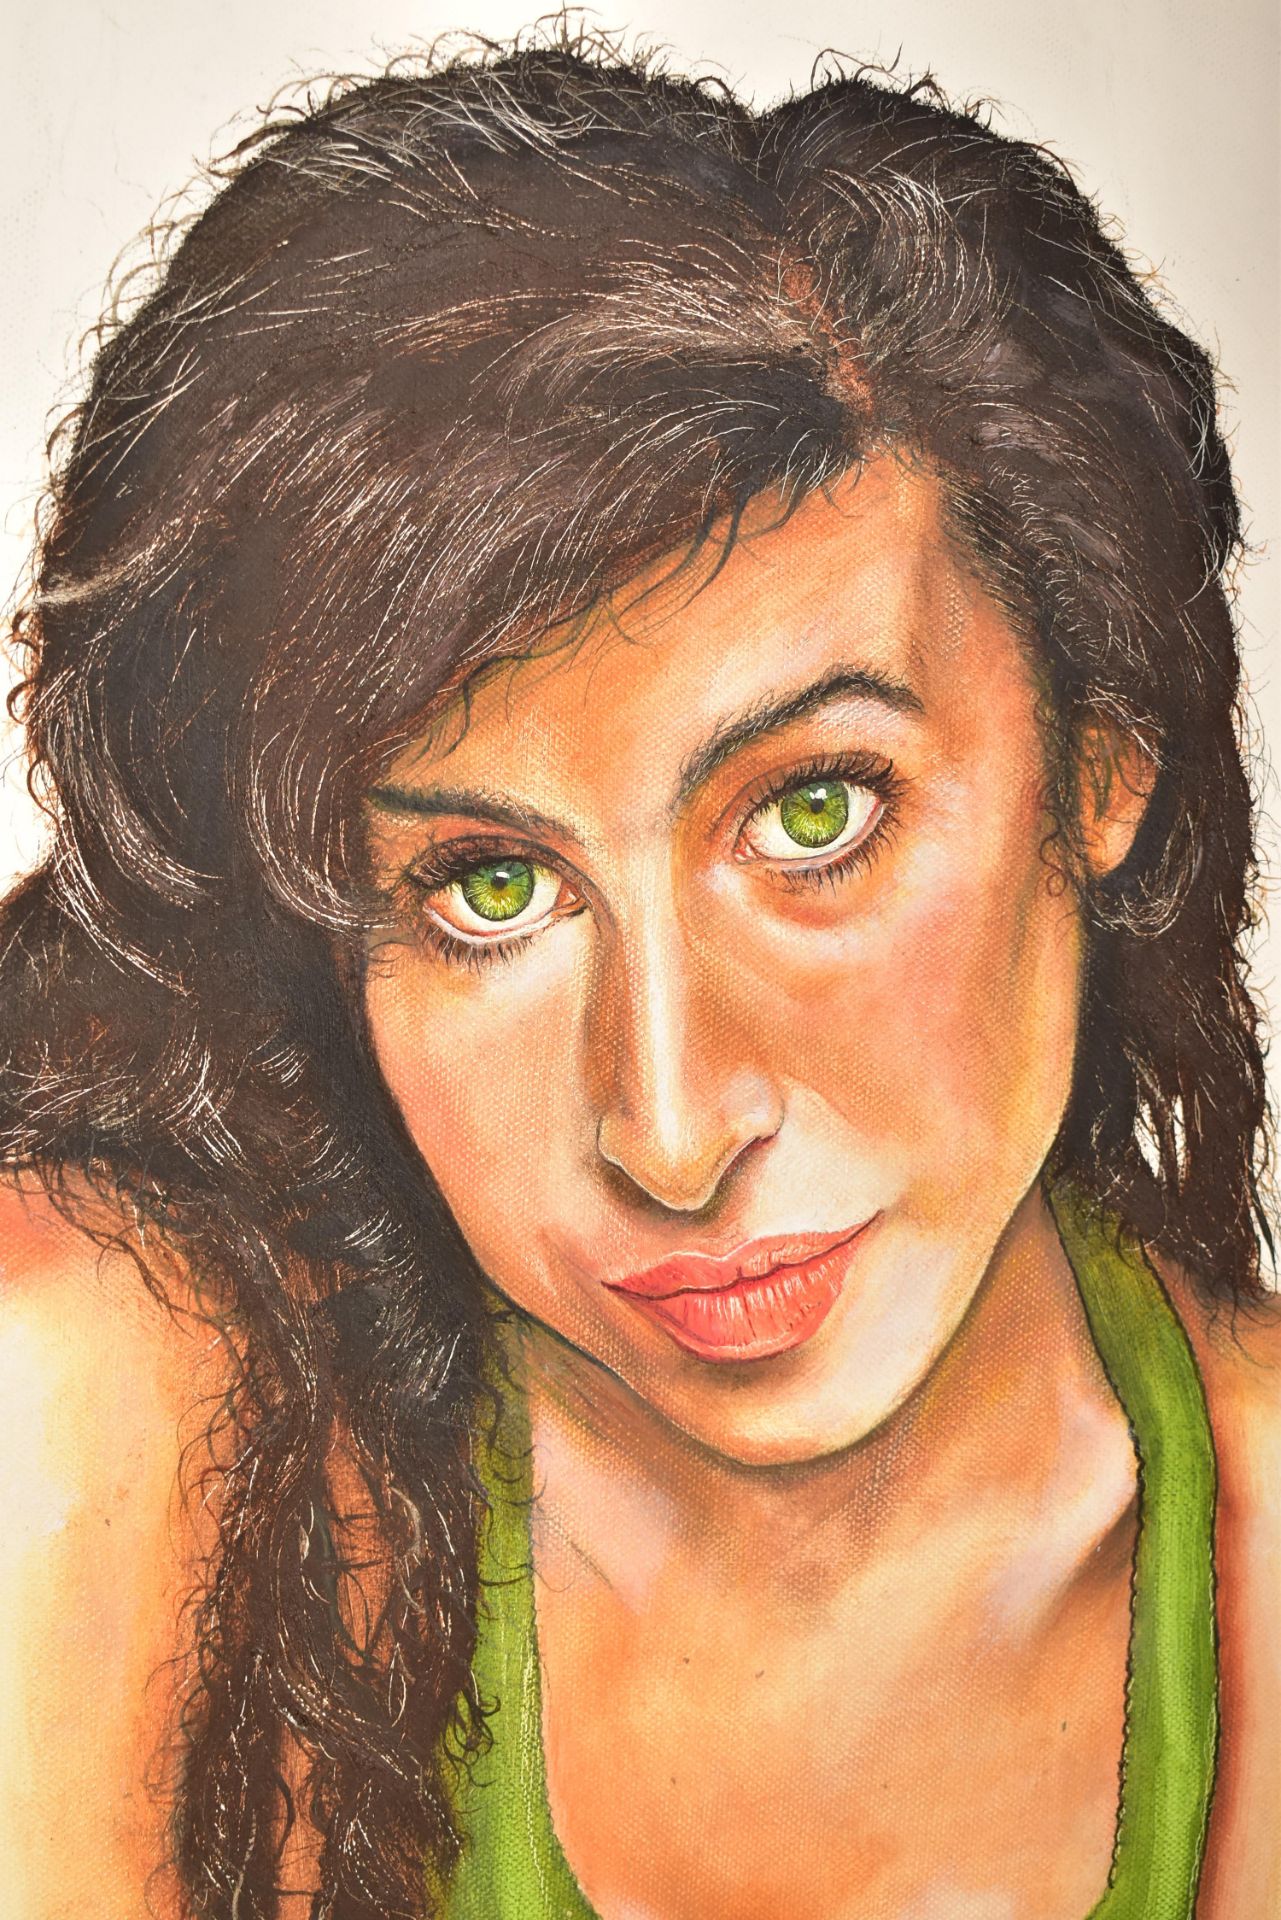 CONTEMPORARY ACRYLIC ON CANVAS PAINTING OF AMY WINEHOUSE - Image 2 of 5